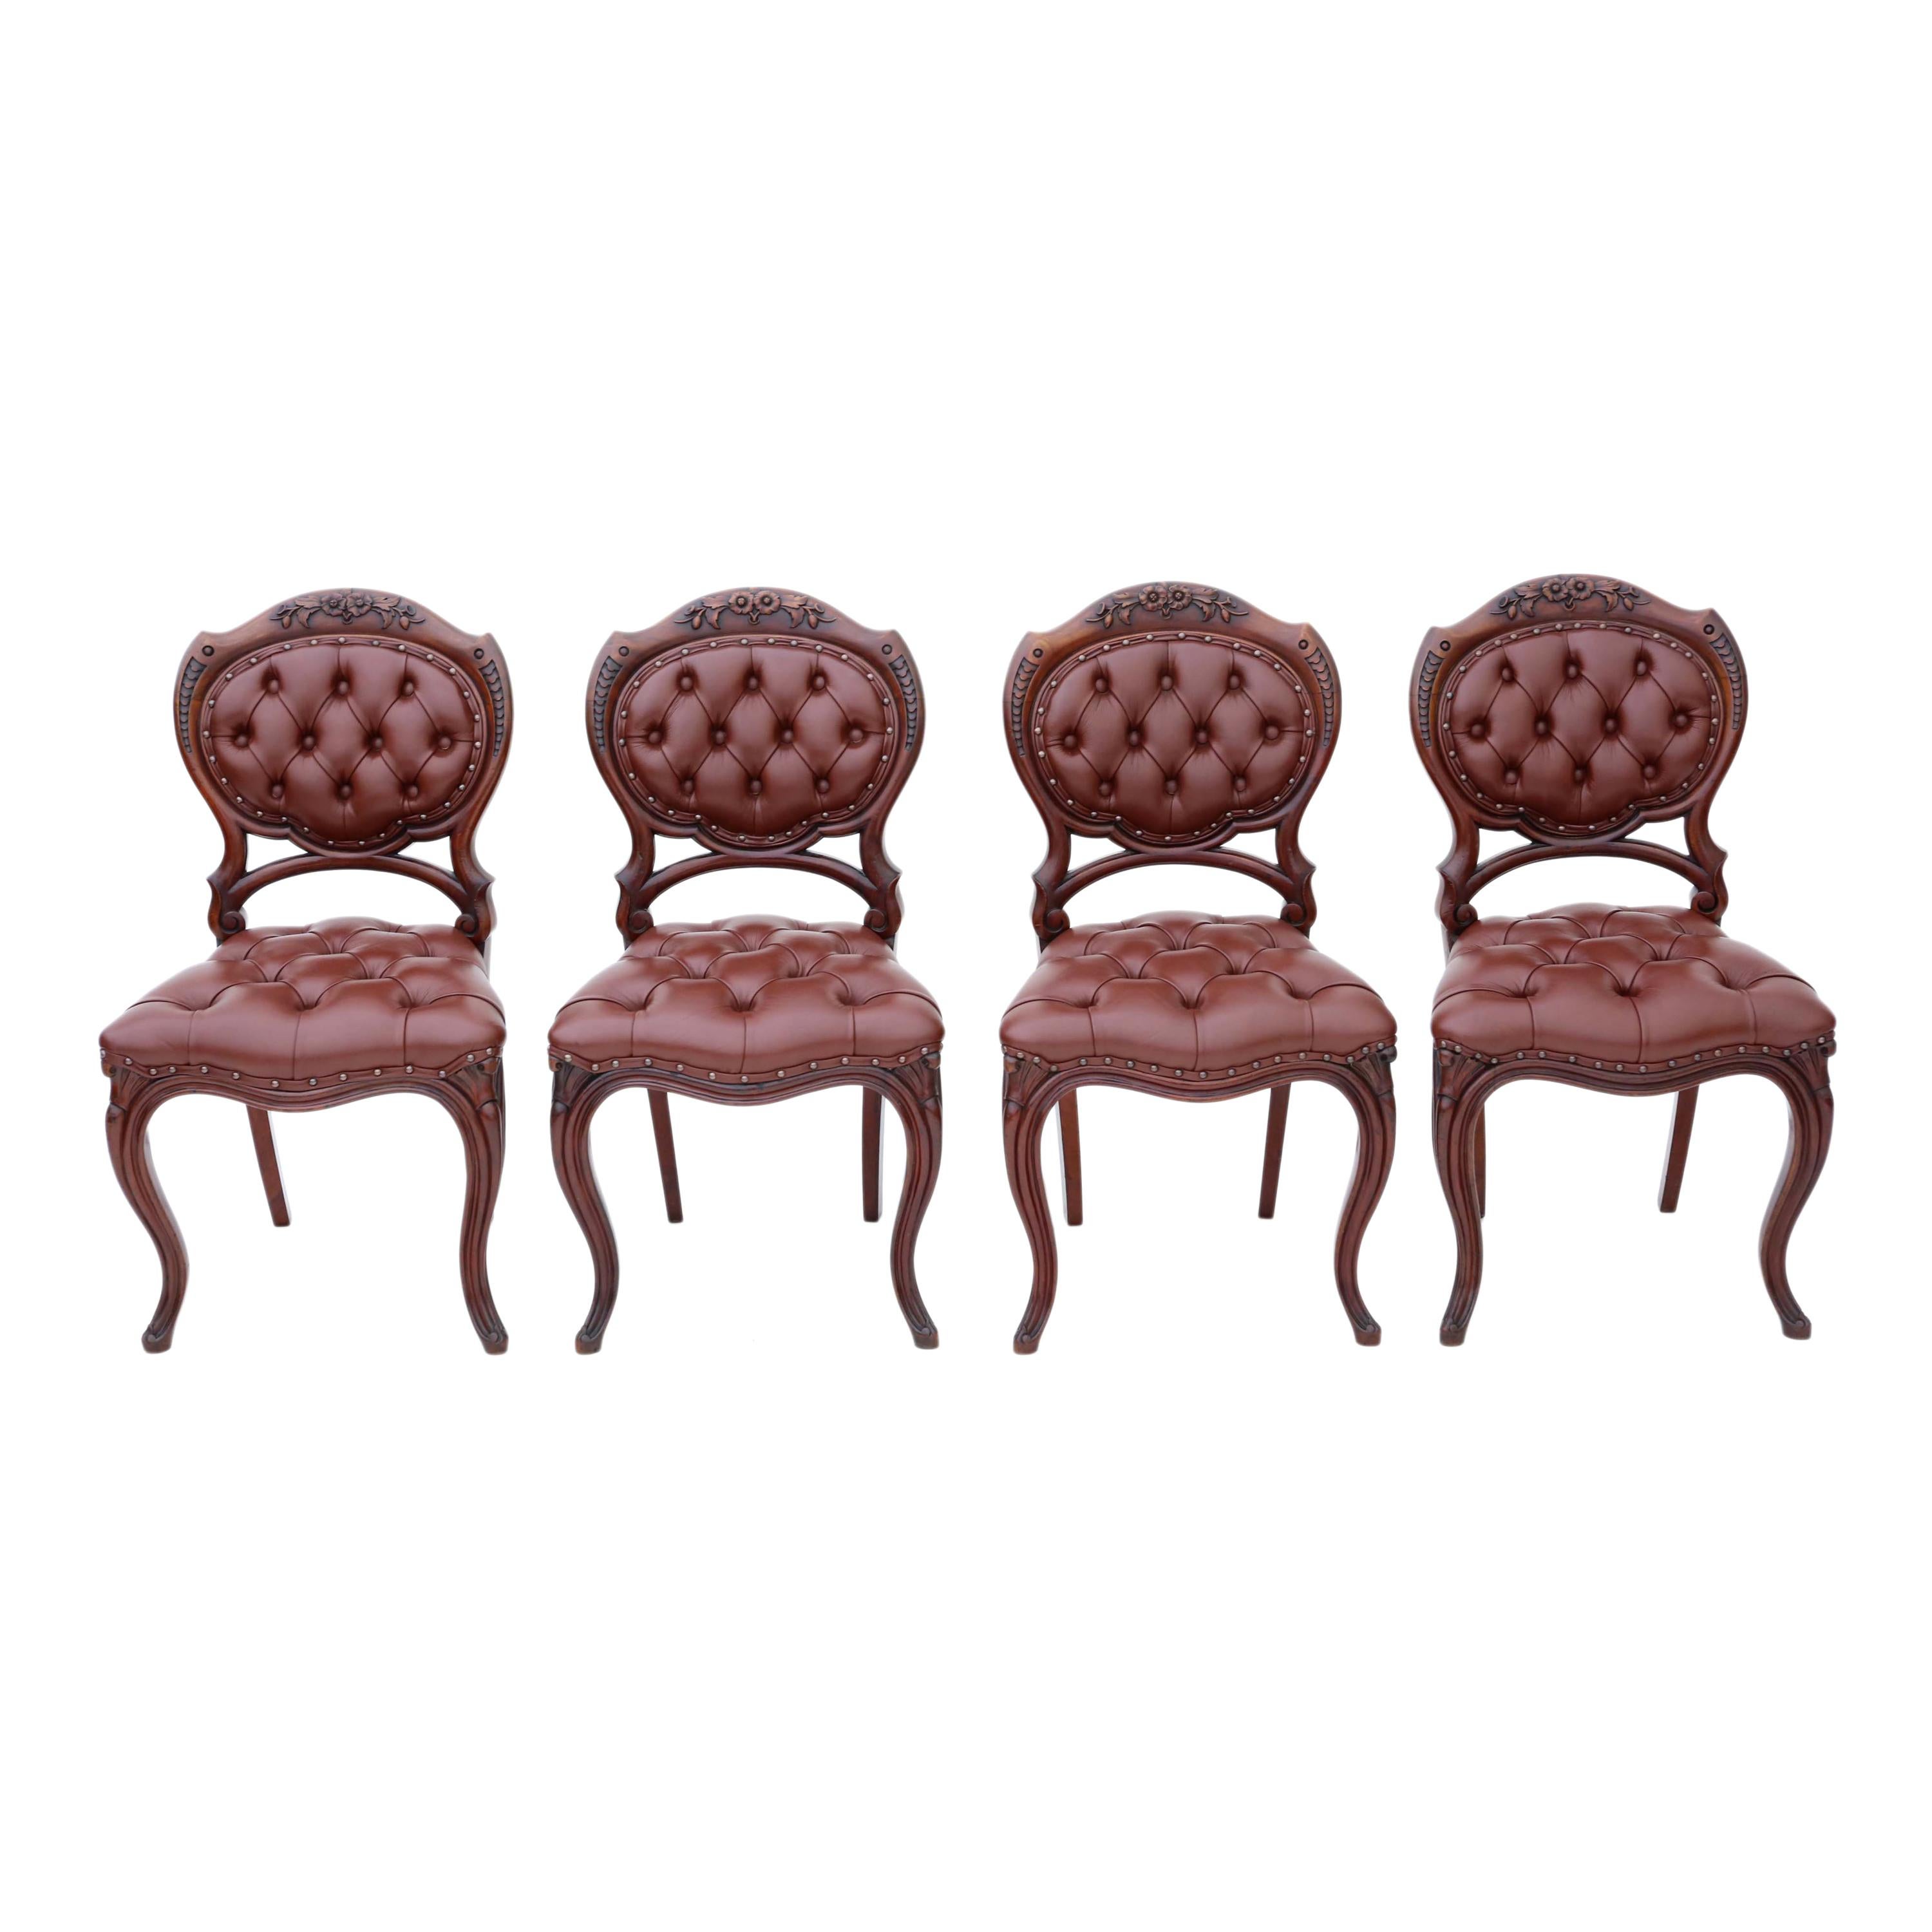 Set of 4 Victorian circa 1870 Mahogany Leather Dining Chairs